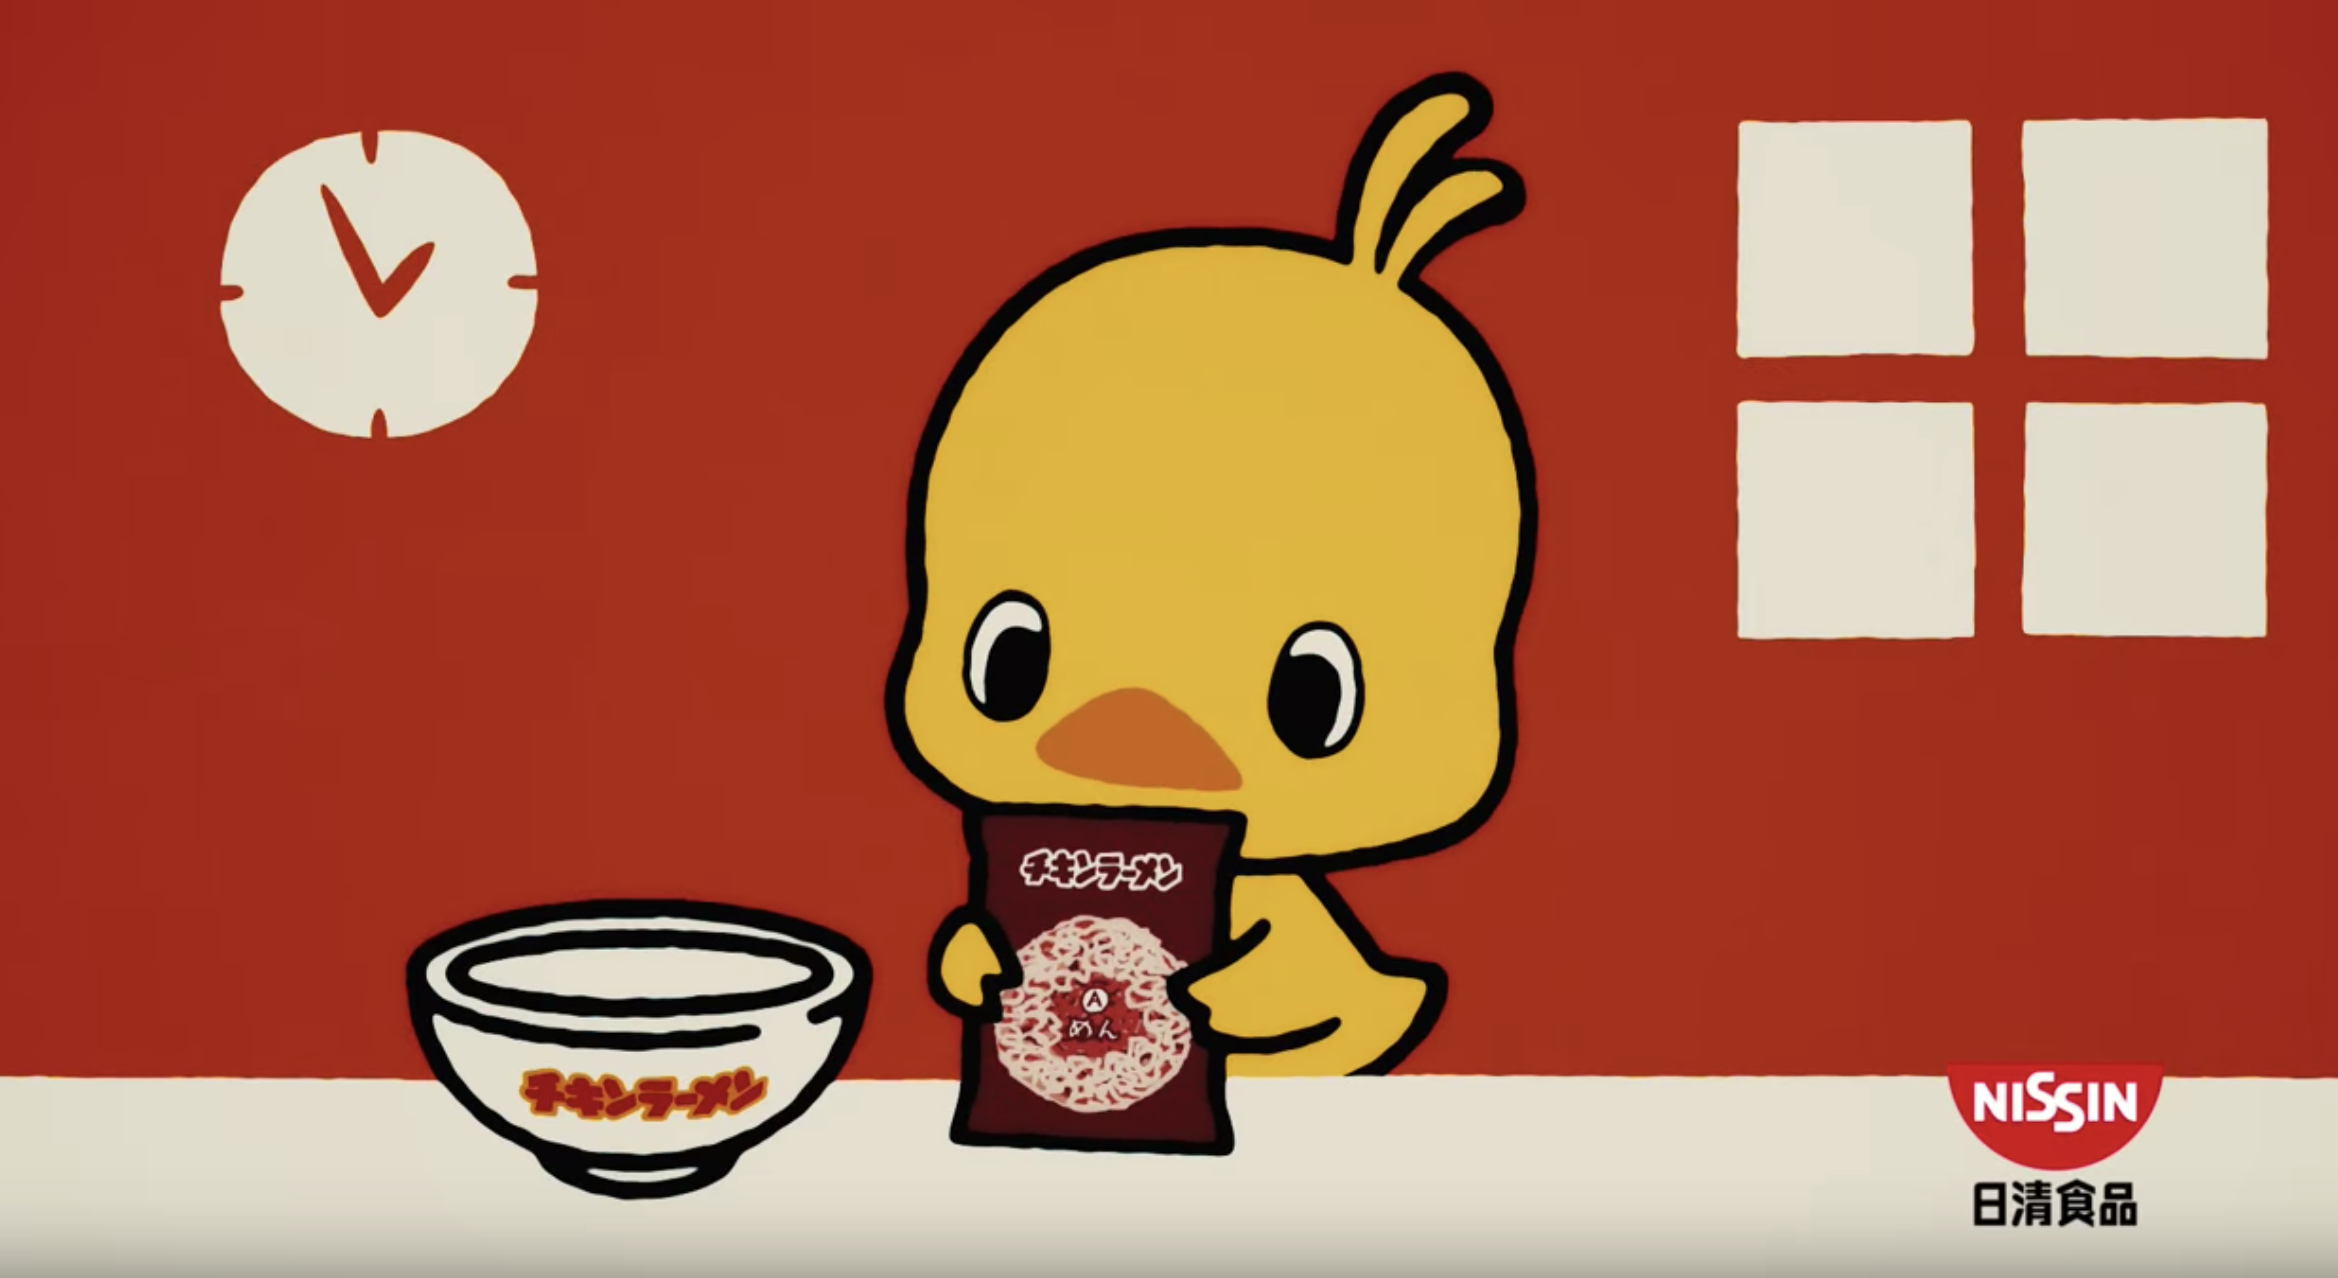 Heavy metal Japanese chicken ramen commercial make ads great again